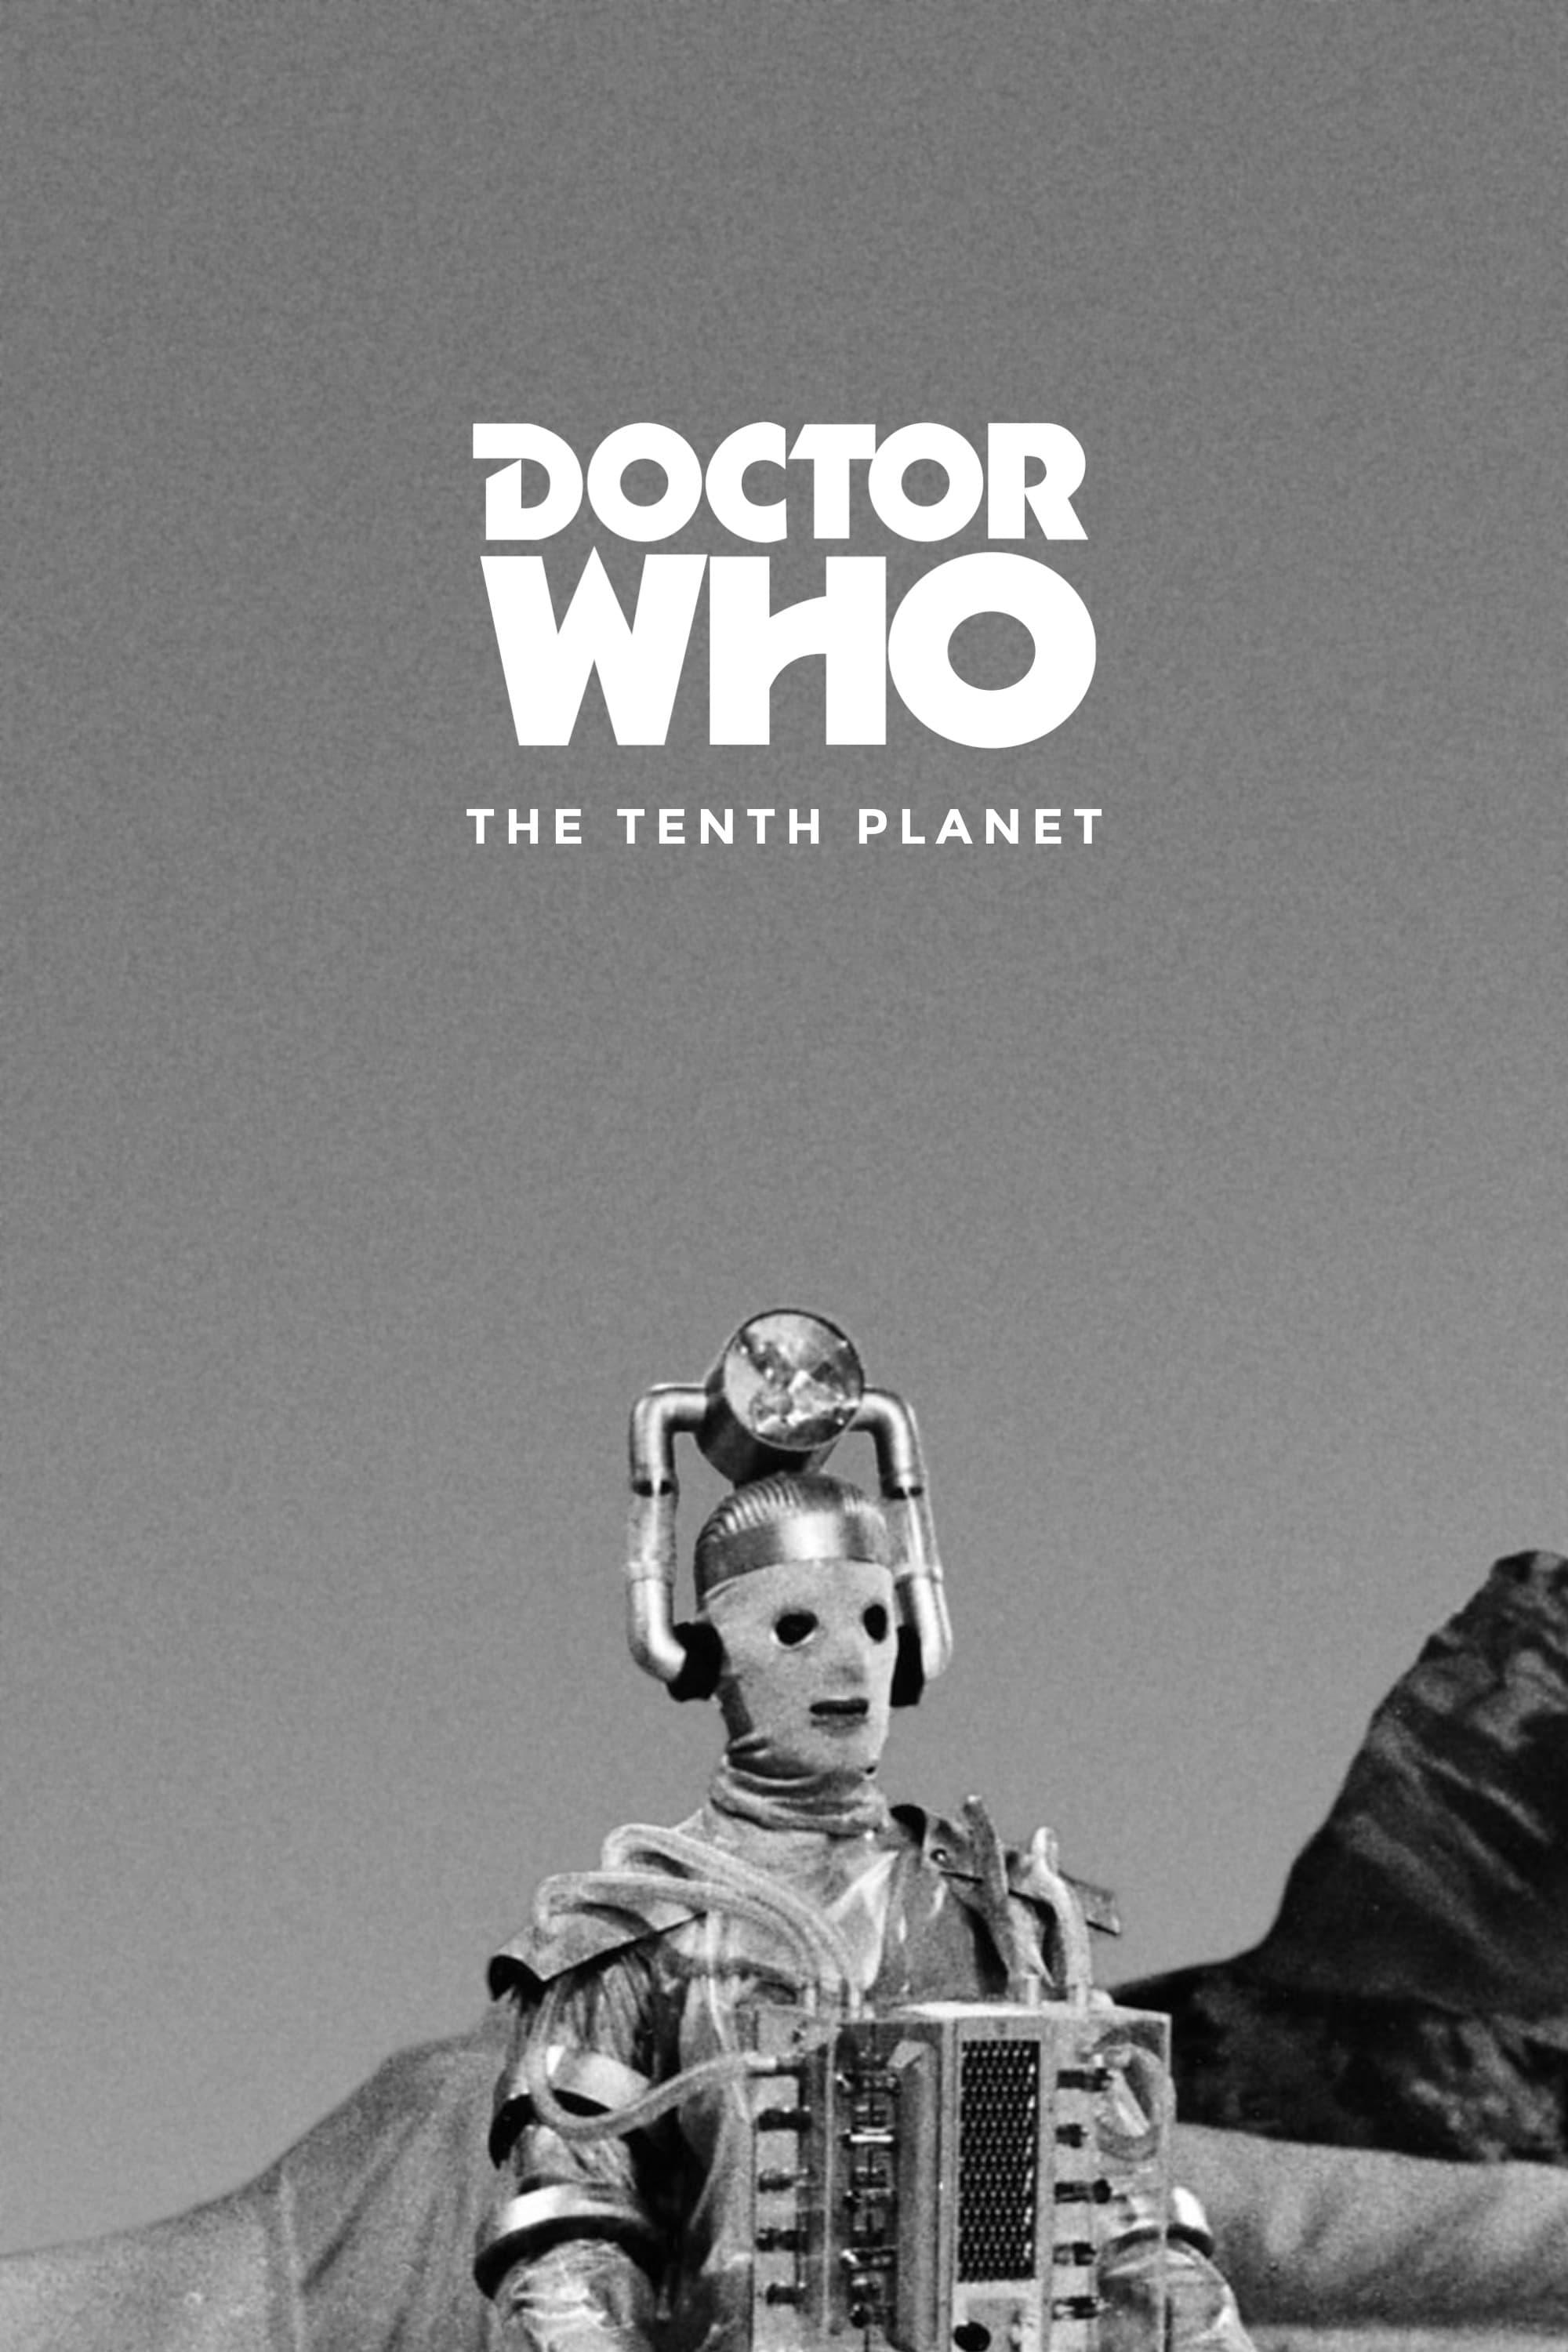 Doctor Who: The Tenth Planet poster